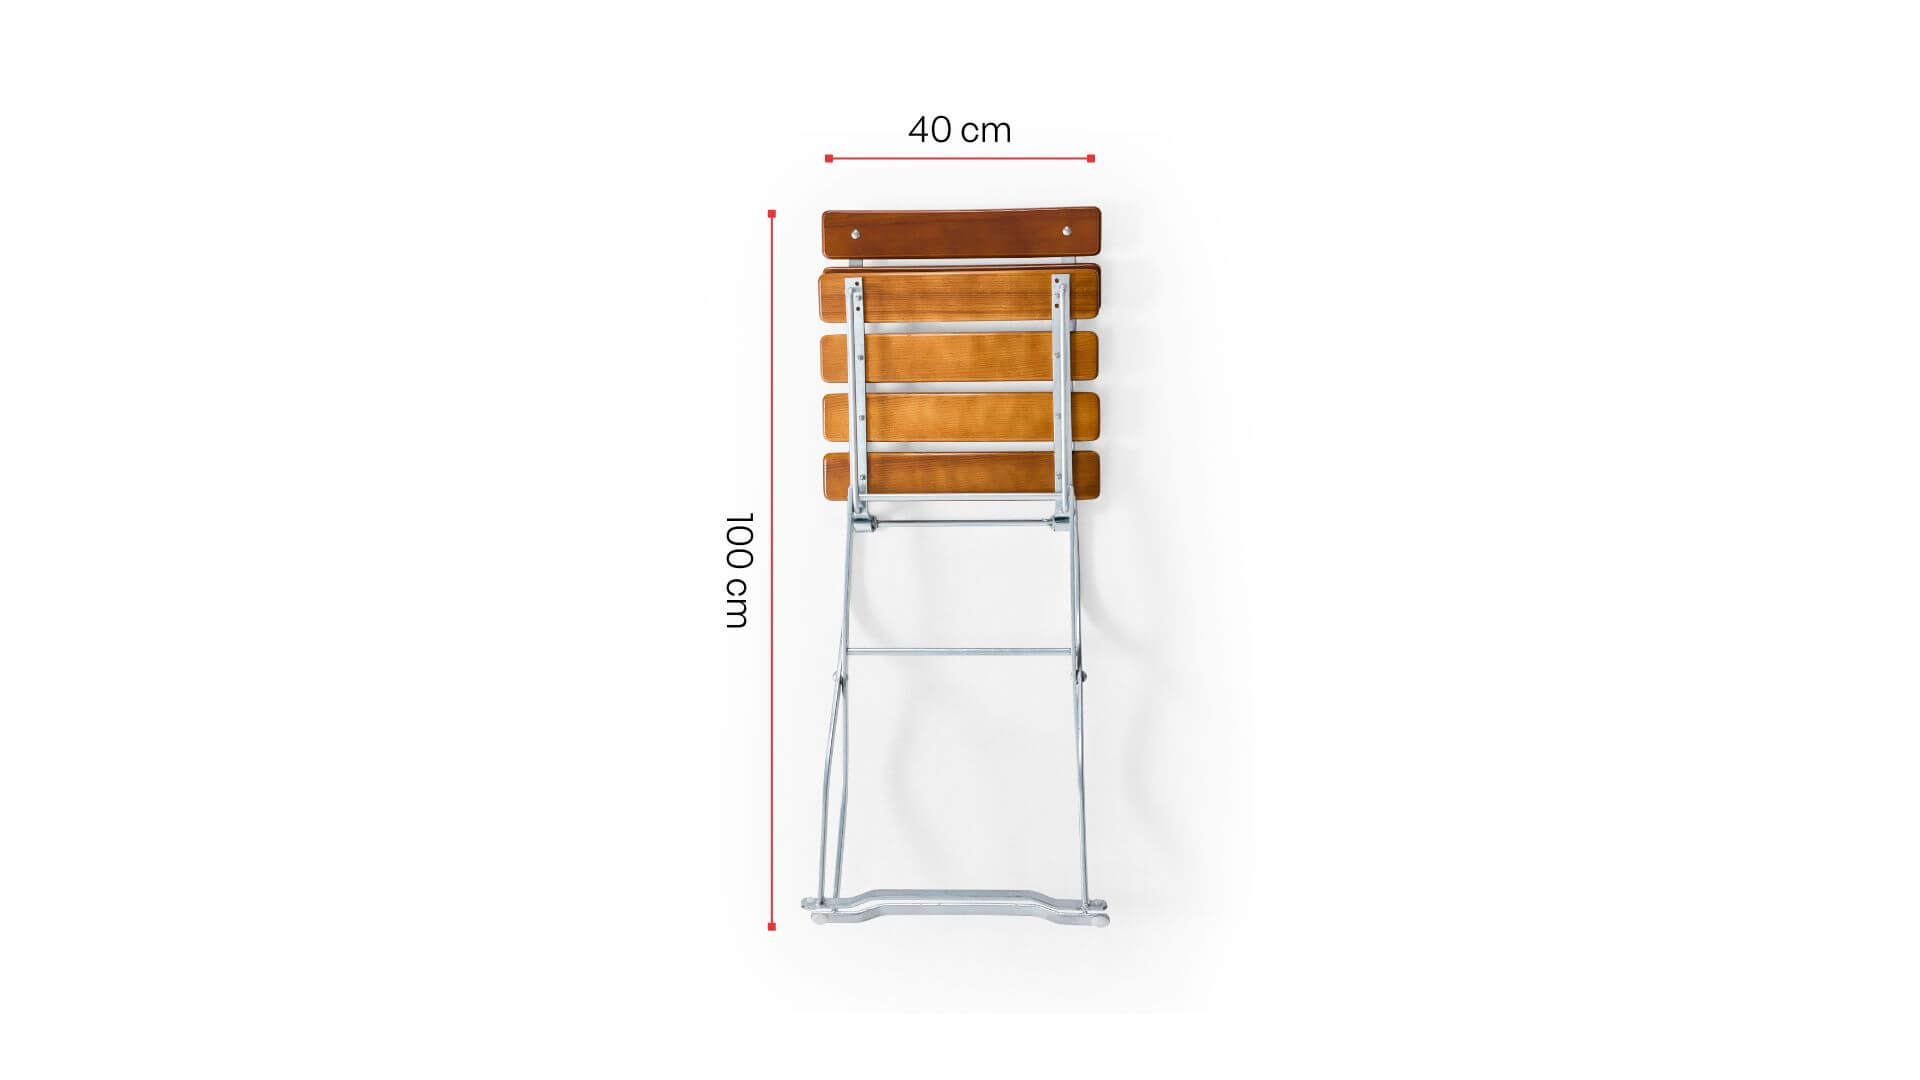 Dimensions of the folded beer garden chair are shown.